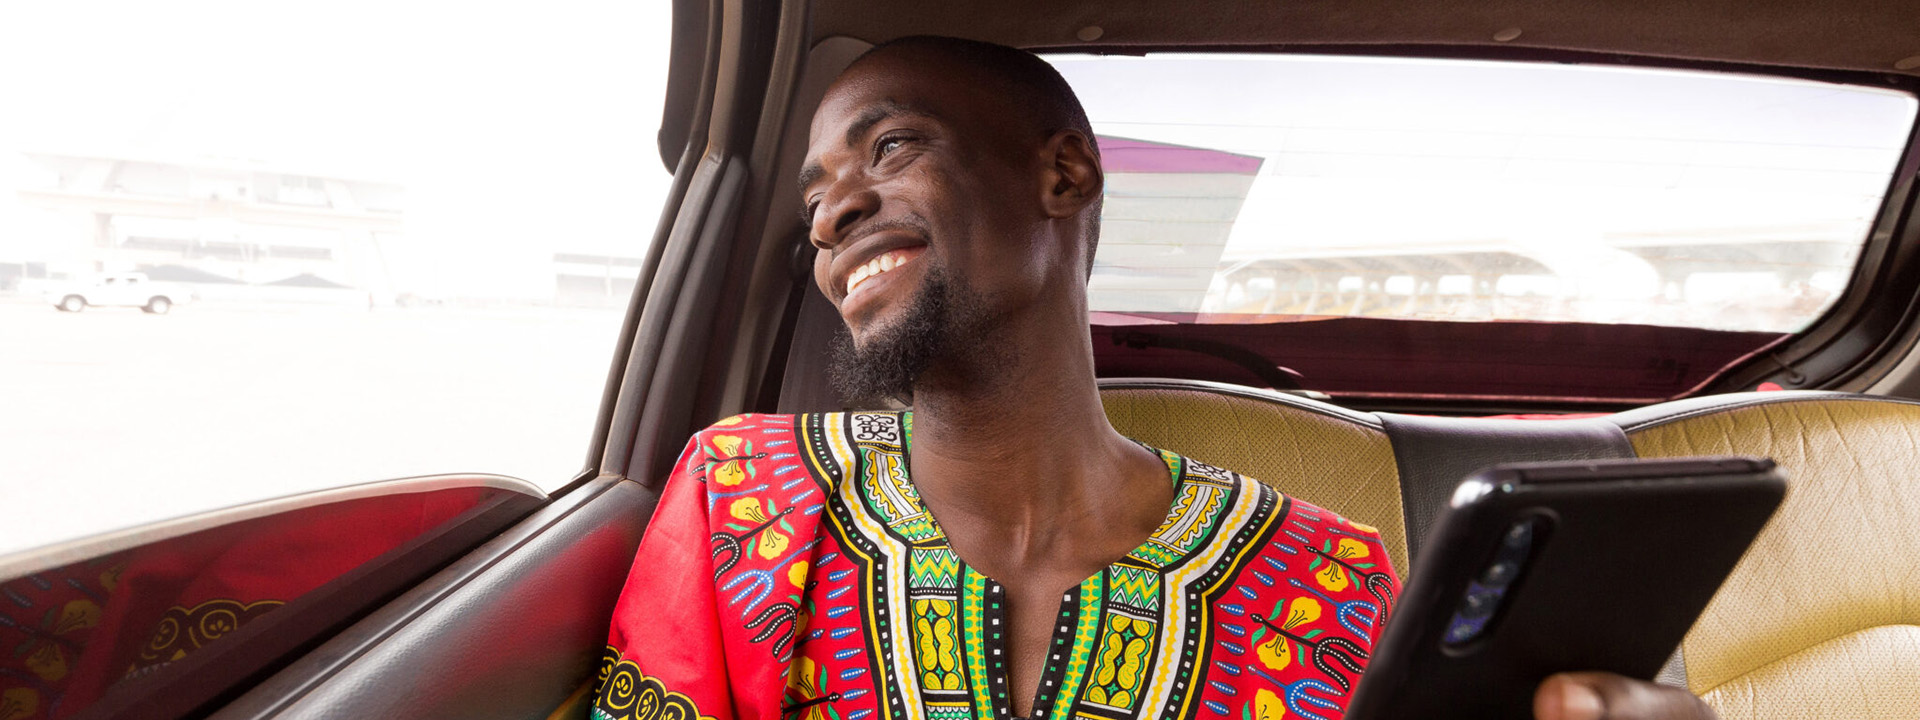 Young African man in a car holding a mobile phone and laughing